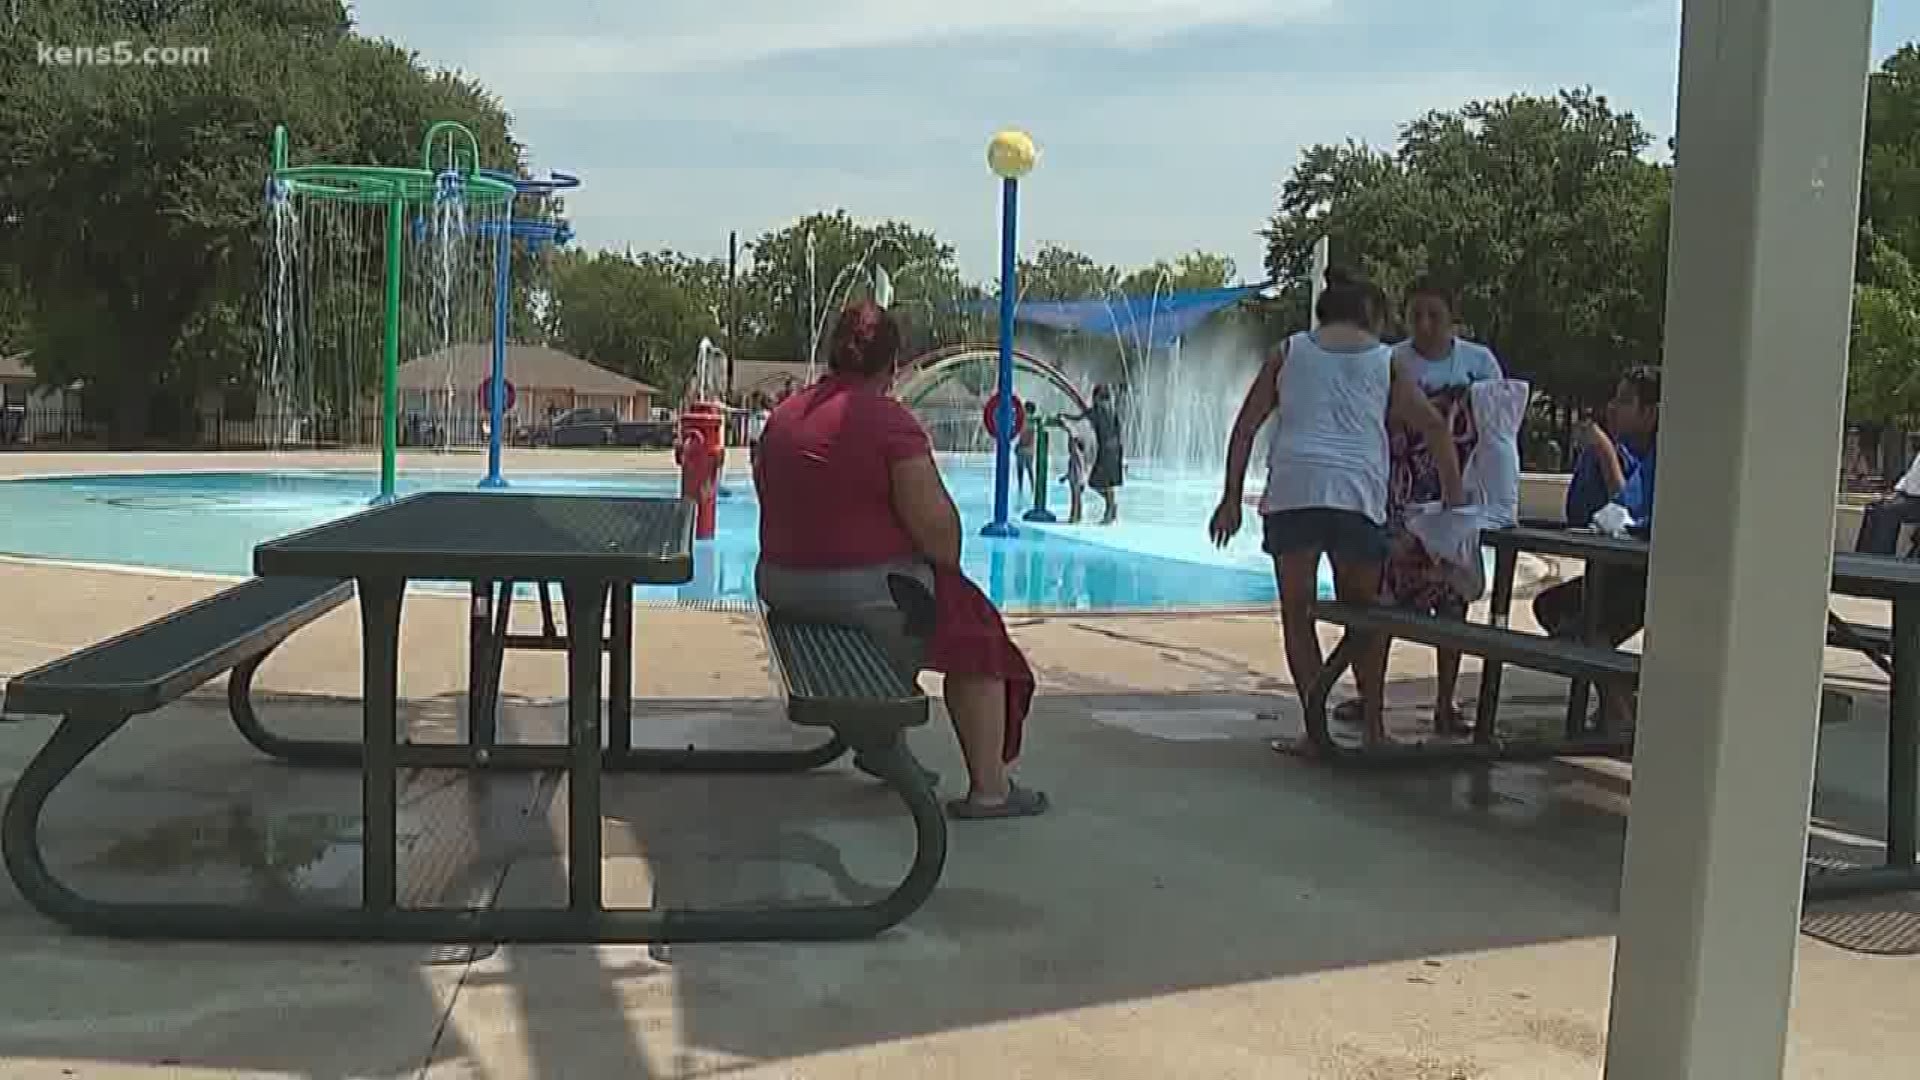 San Antonio reached 105 degrees Monday. To combat this dangerous heat, the city has set up dozens of cooling stations. Here's eyewitness news reporter Charlie Cooper.